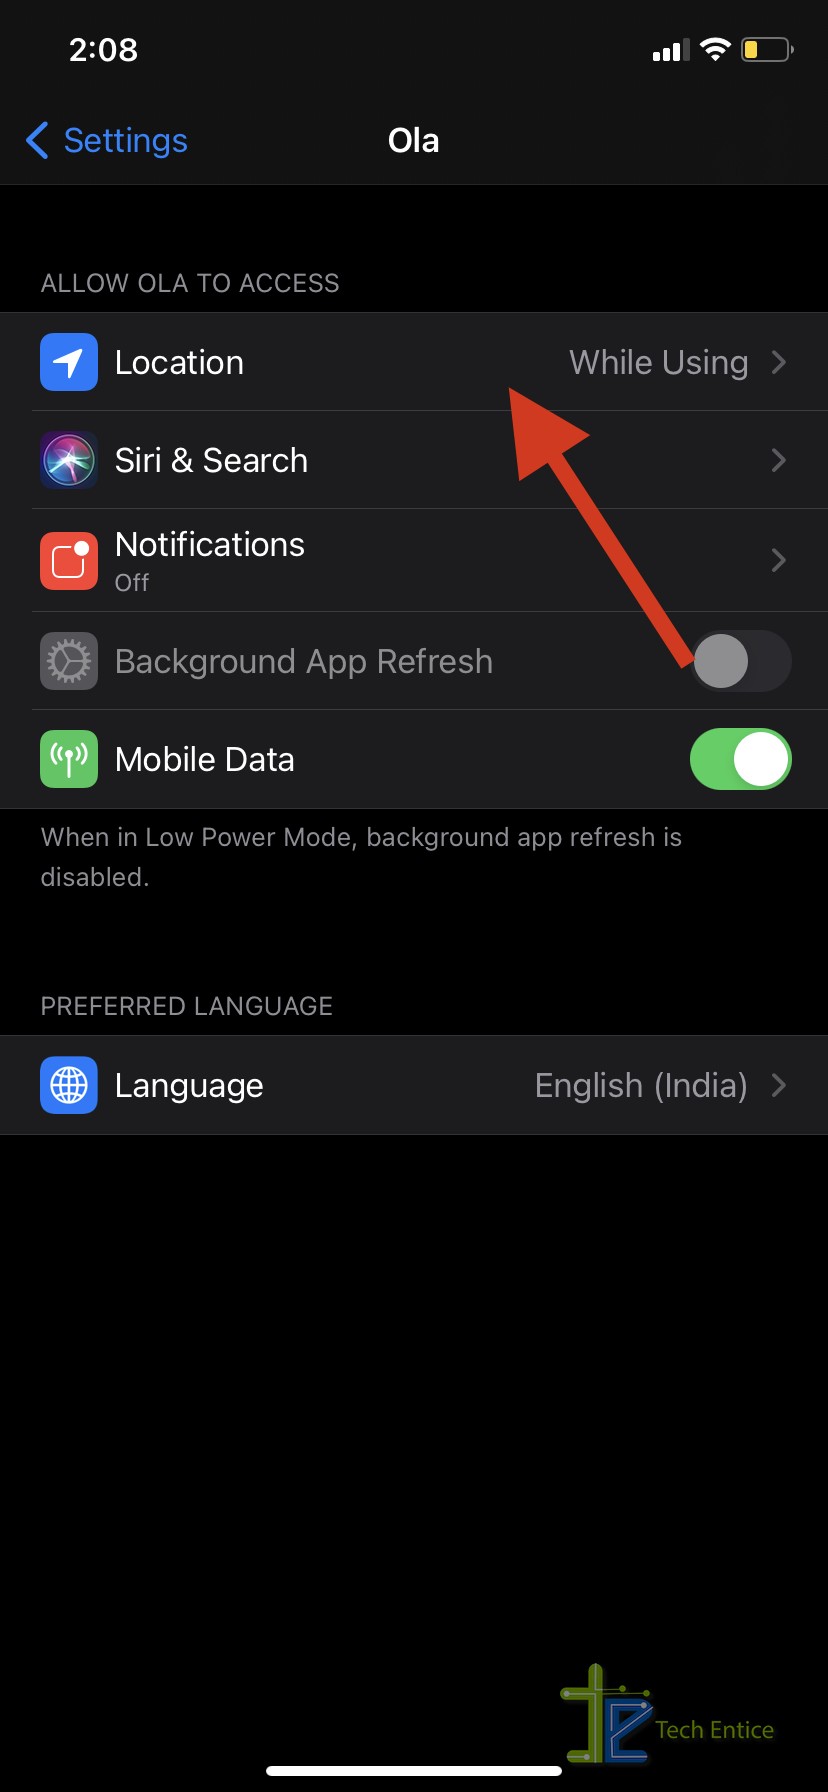 How To Disable Precise Location On iOS?